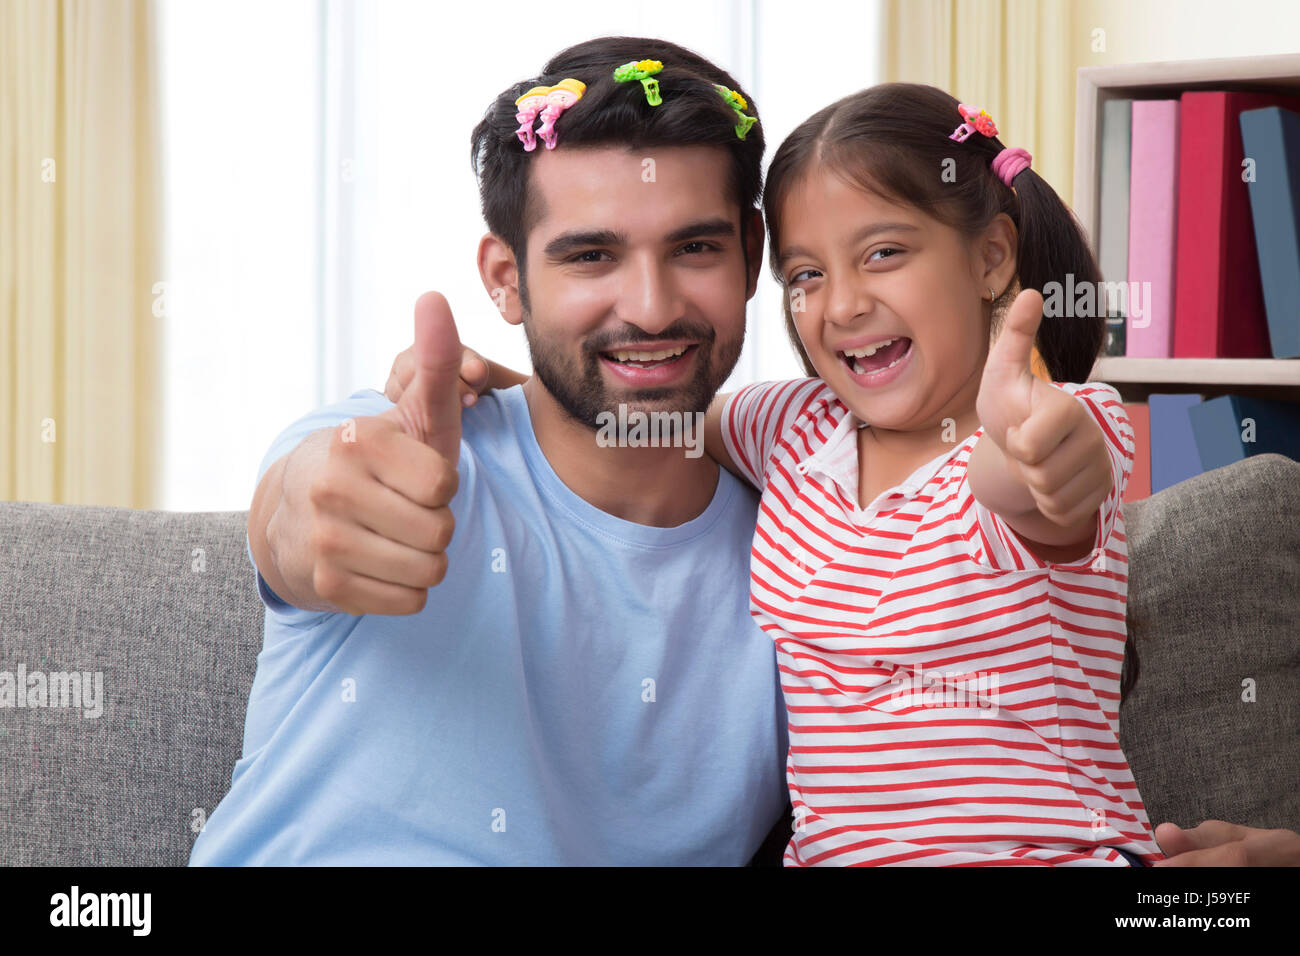 Funny father wearing hair clips and daughter making thumbs up sign Stock Photo